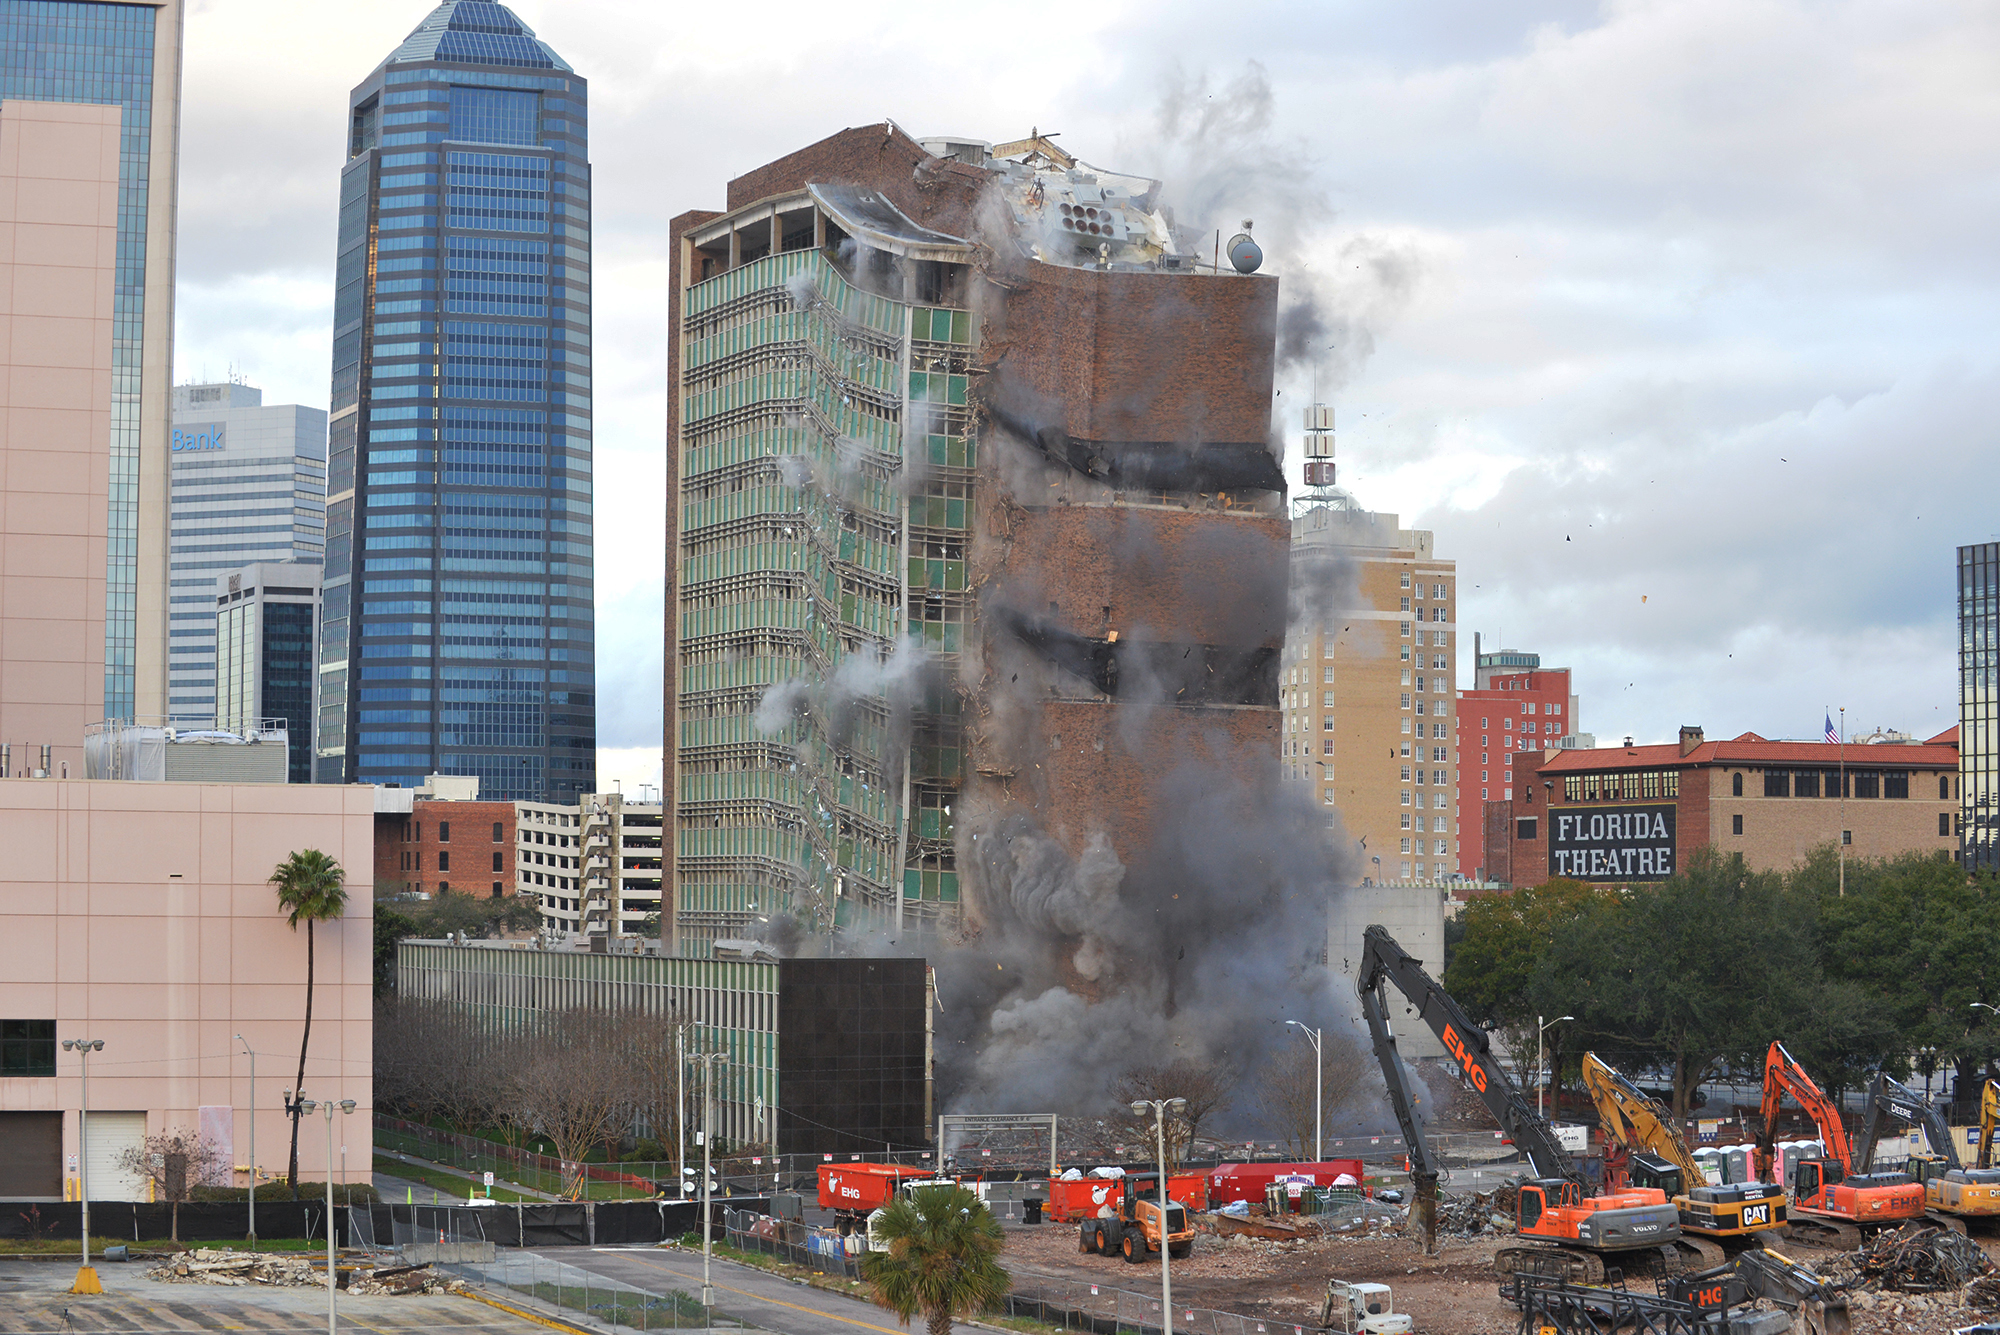 The old City Hall Annex Building at 220 E. Bay Street was imploded Jan. 20.